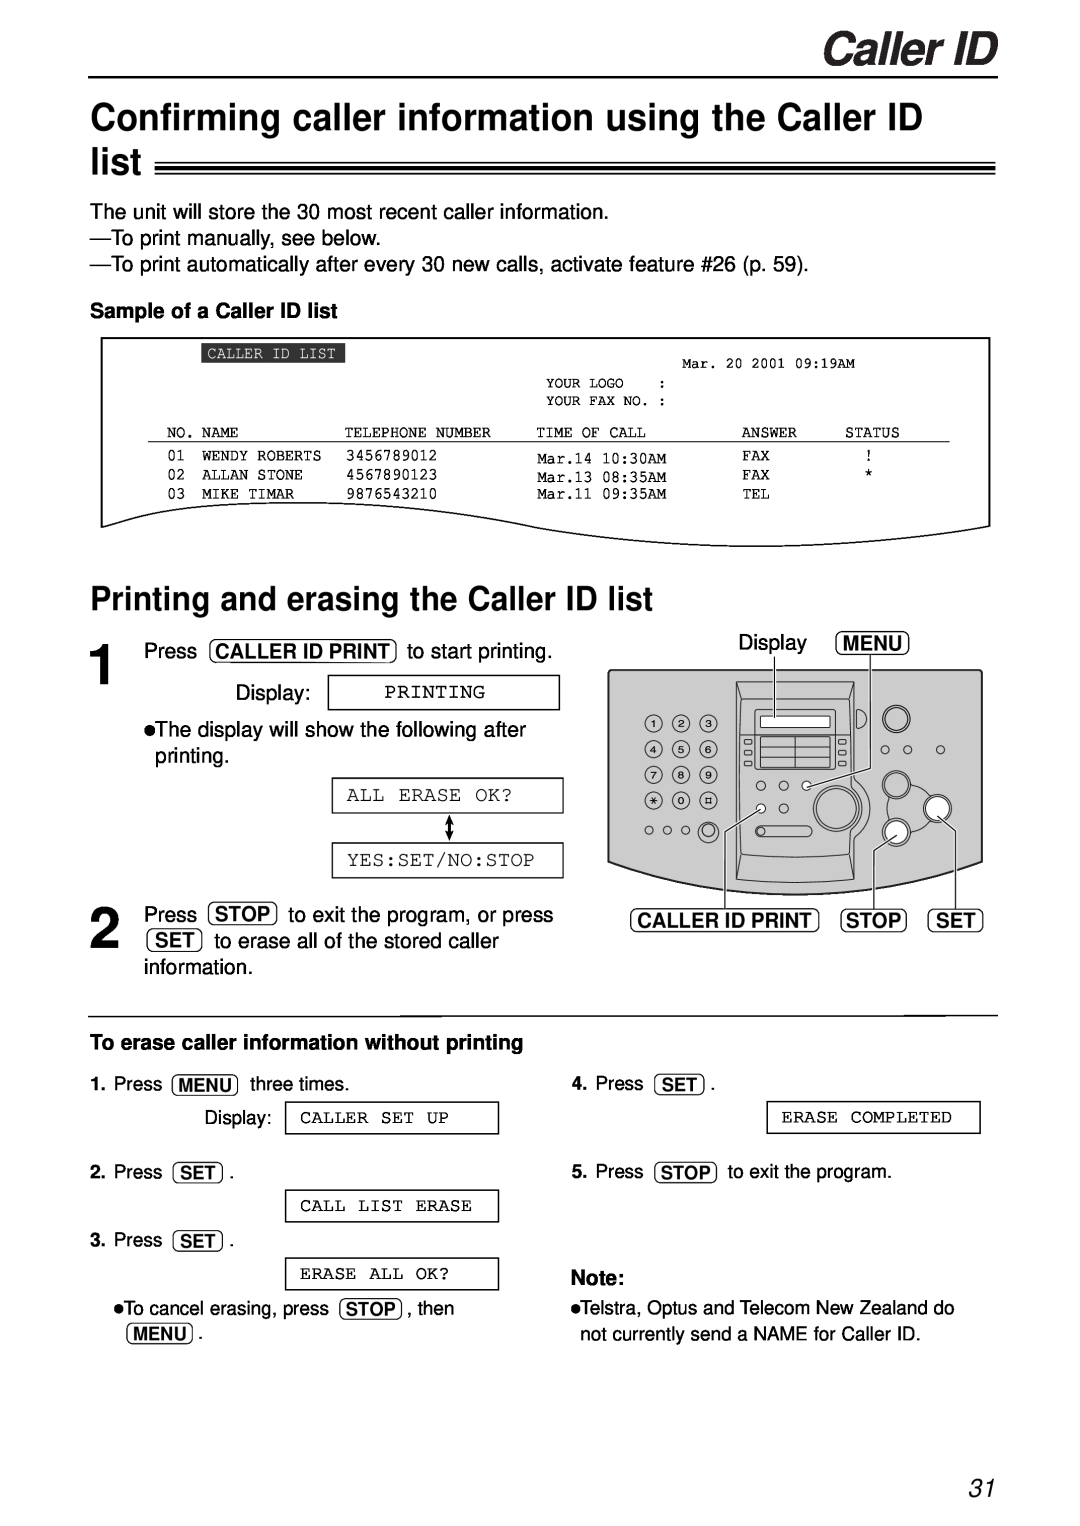 Panasonic KX-FL501NZ manual Confirming caller information using the Caller ID list, Printing and erasing the Caller ID list 